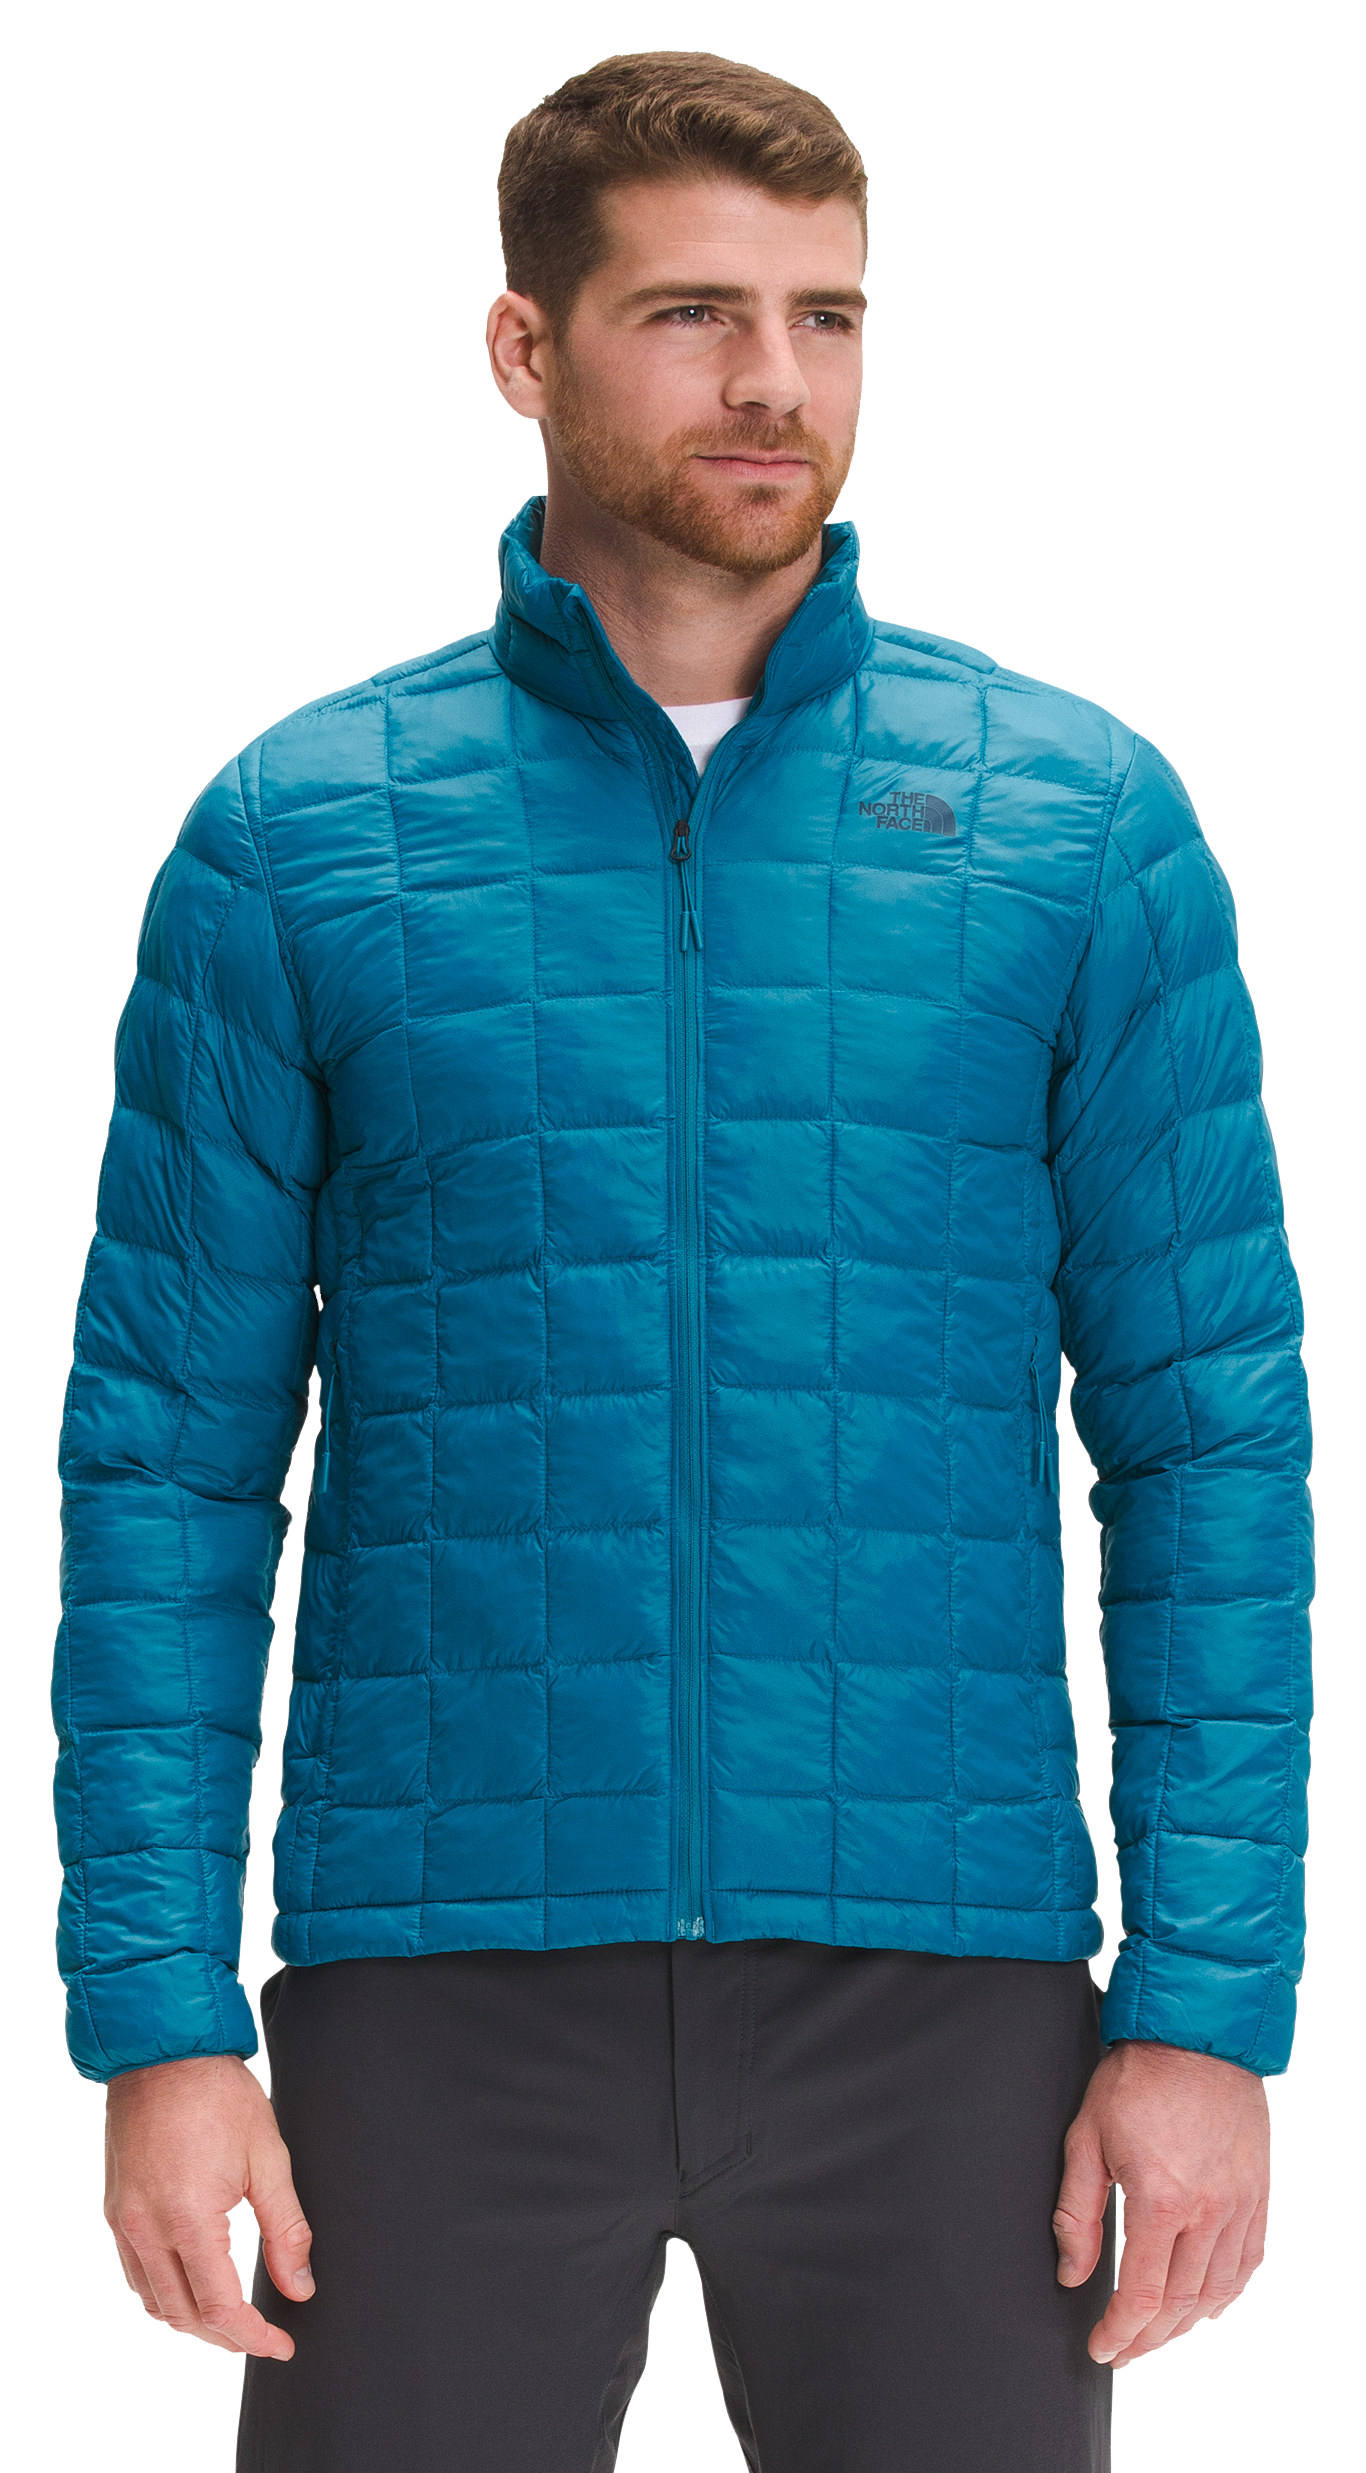 The North Face ThermoBall Eco Quilted Jacket for Men - Banff Blue - XL